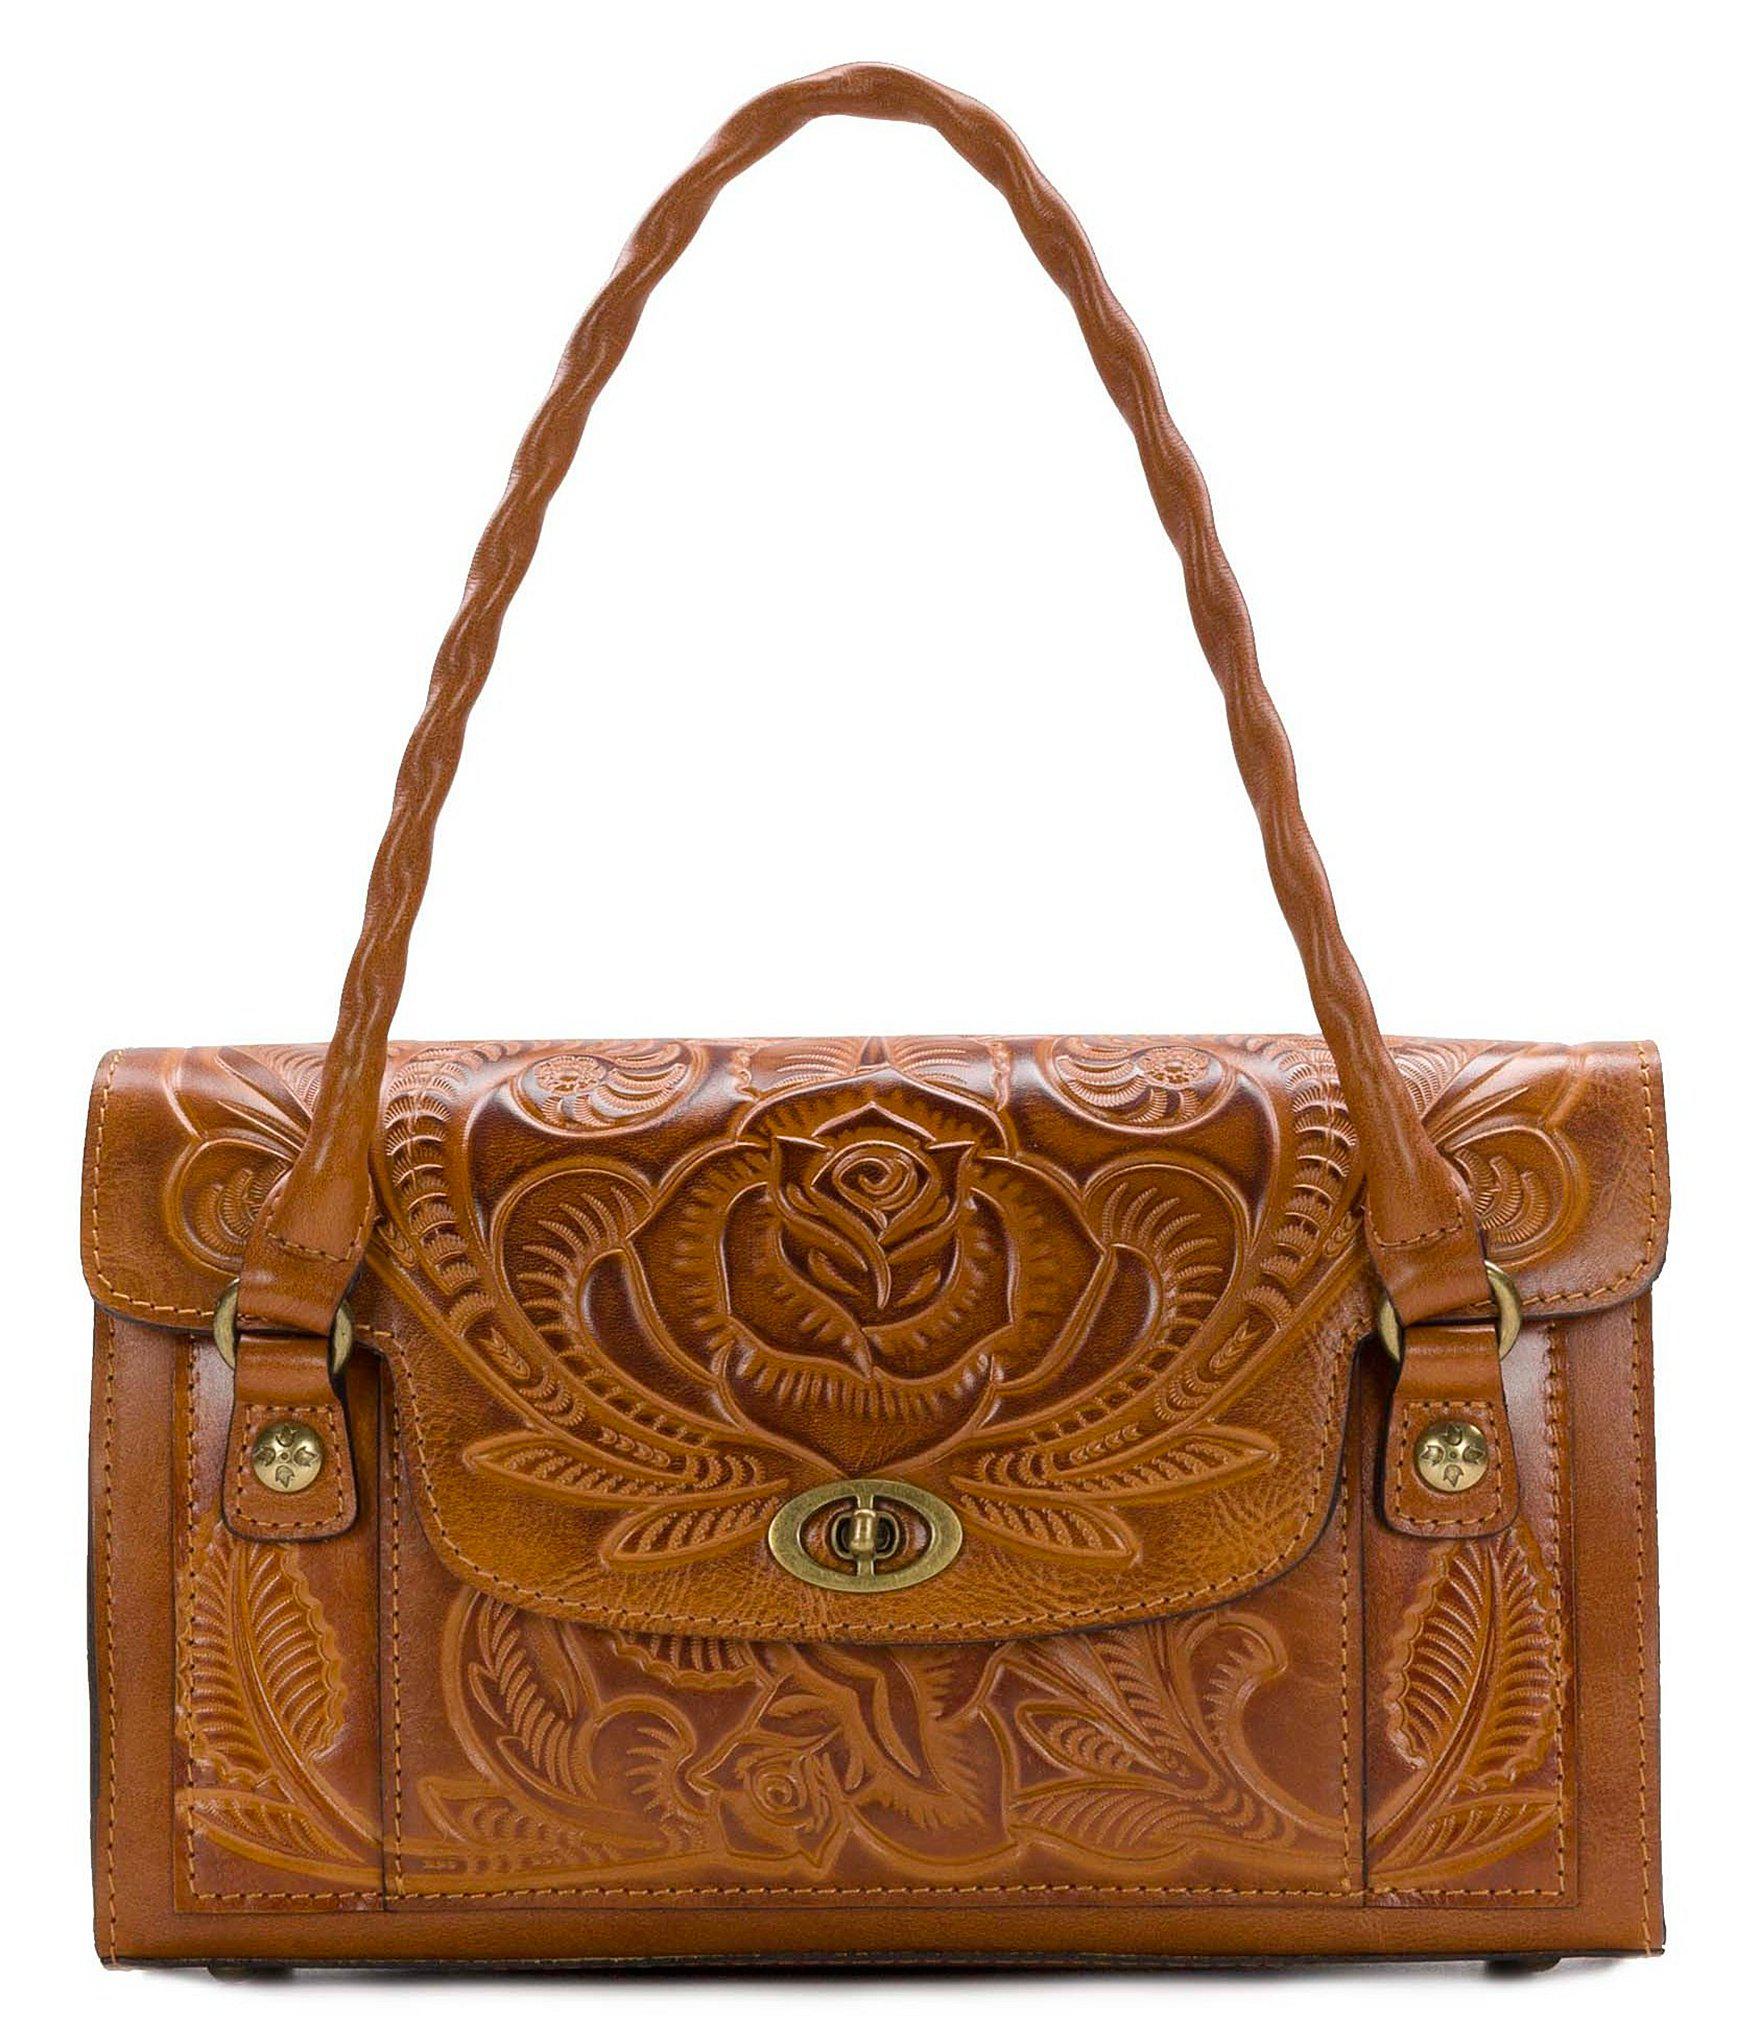 Patricia Nash Burnished Tooled Collection Sanabria Satchel in Metallic